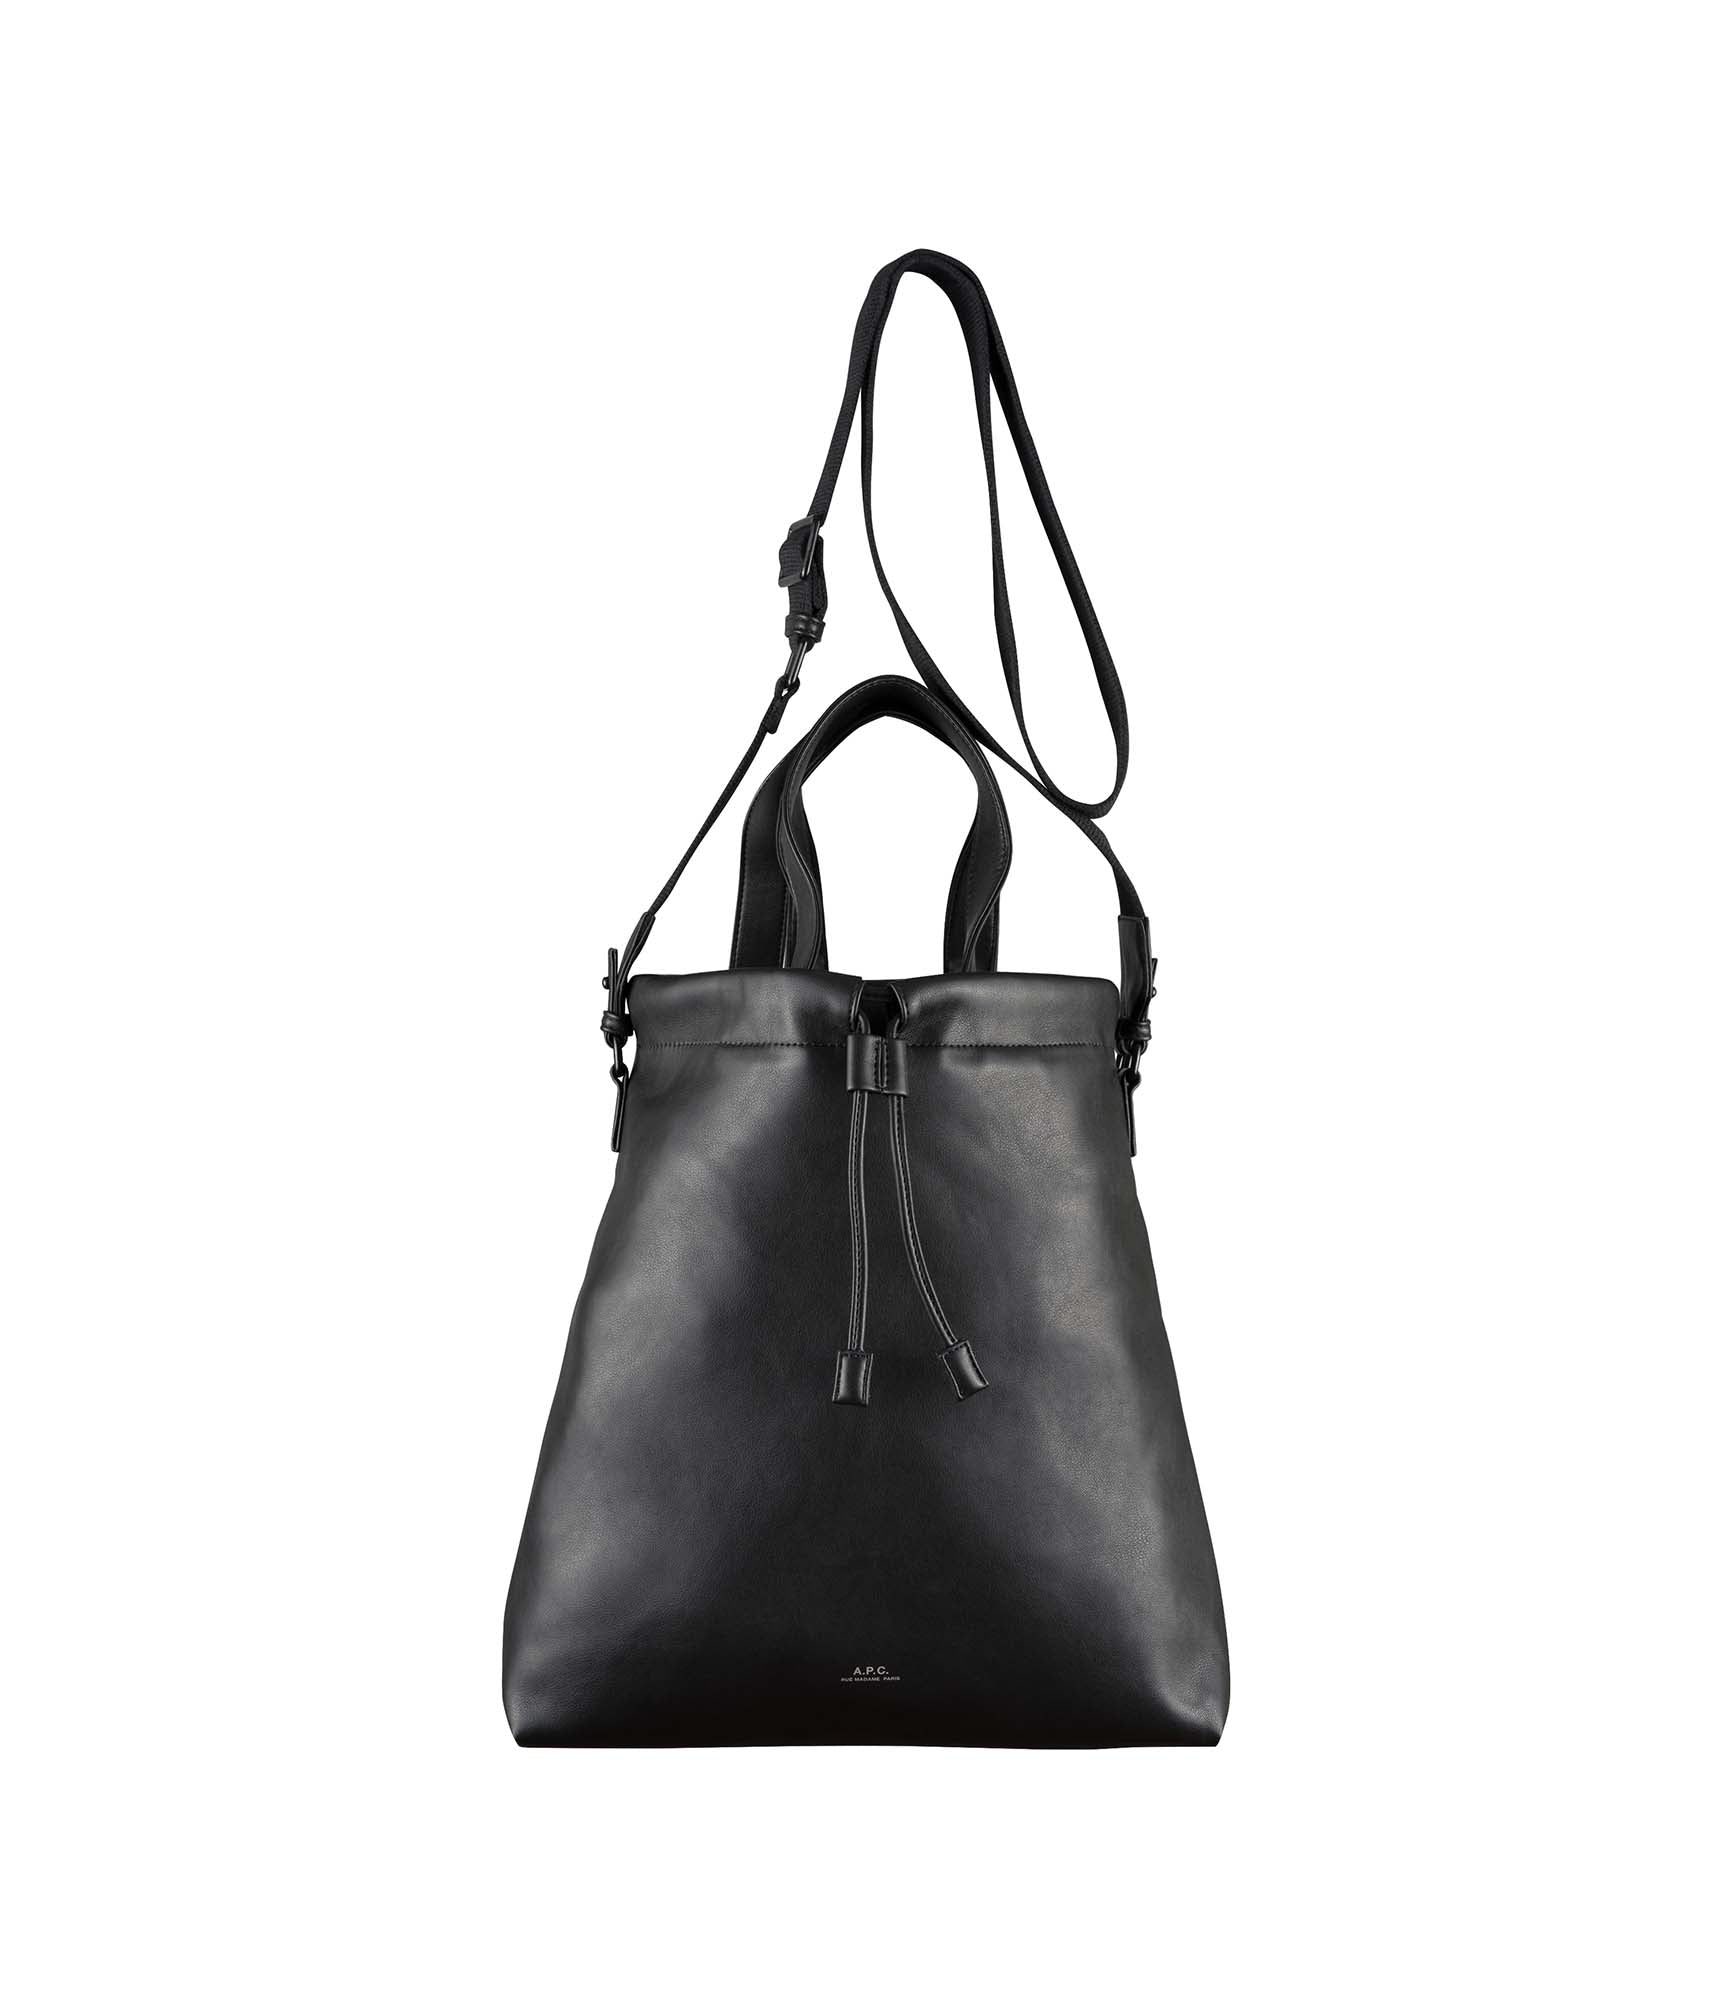 Nino shopping bag - Recycled leather-look material | A.P.C. Accessories